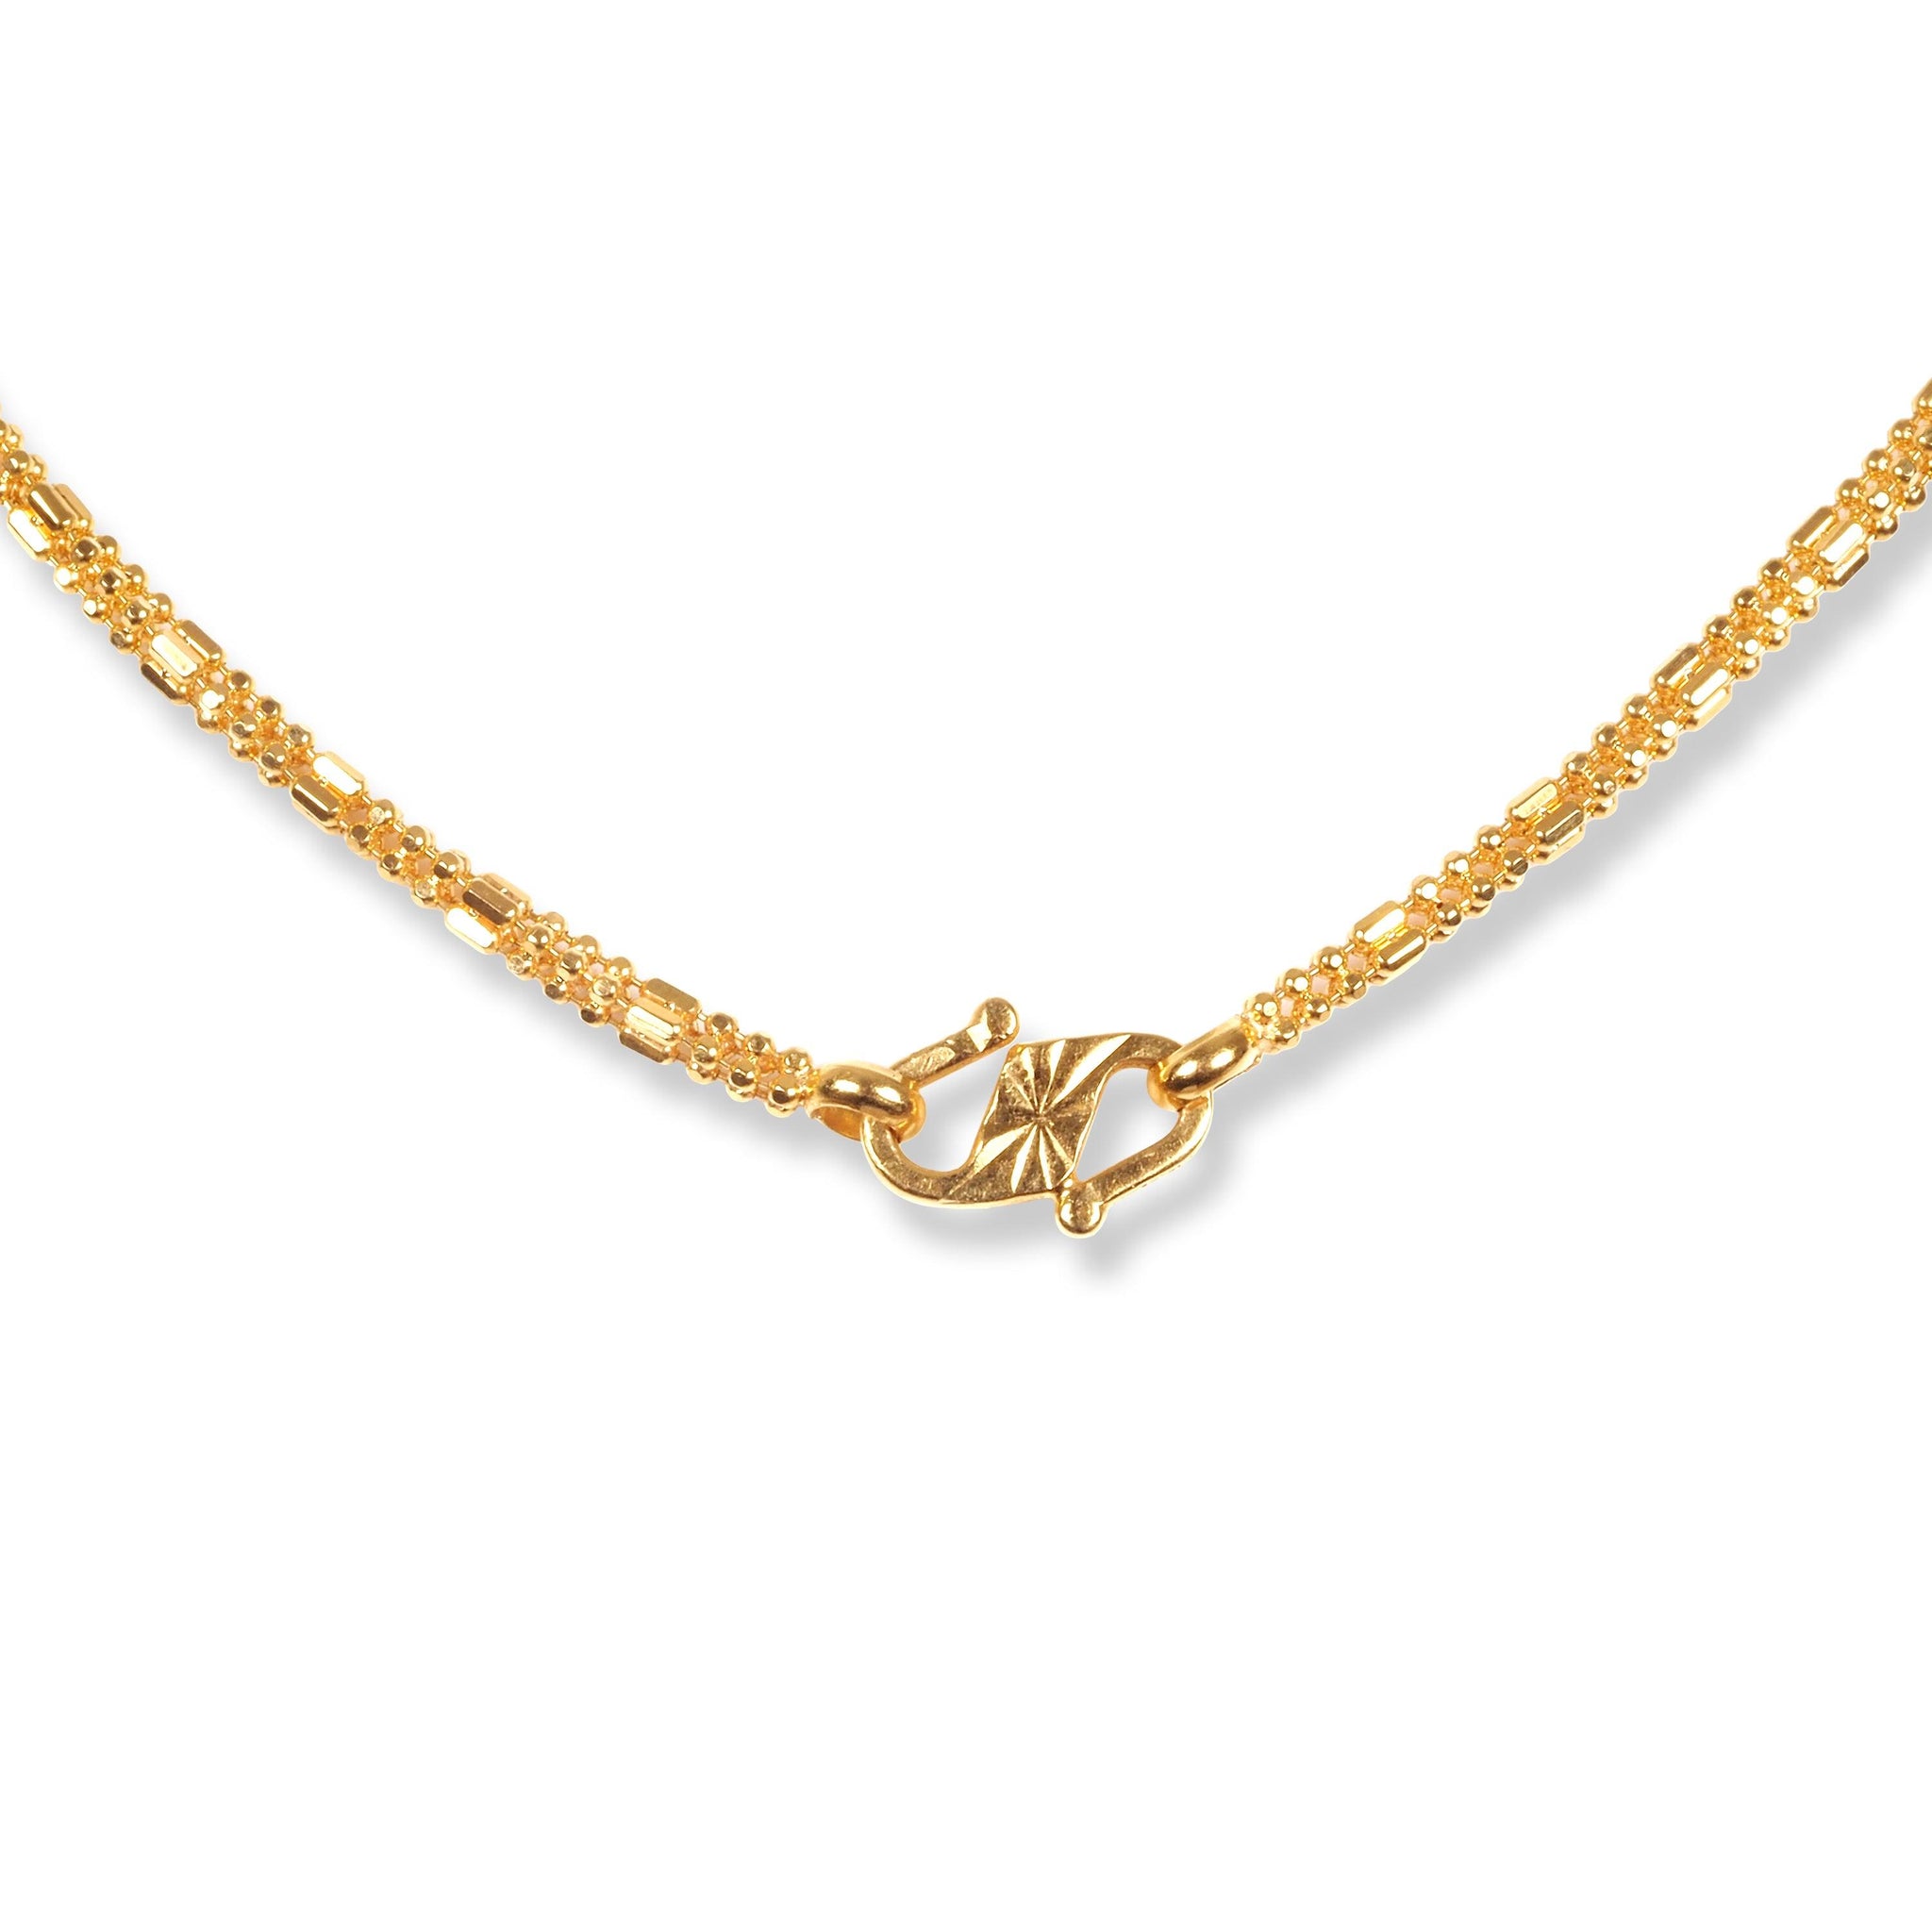 22ct Gold Beaded Interval Chain with S Clasp C-7143